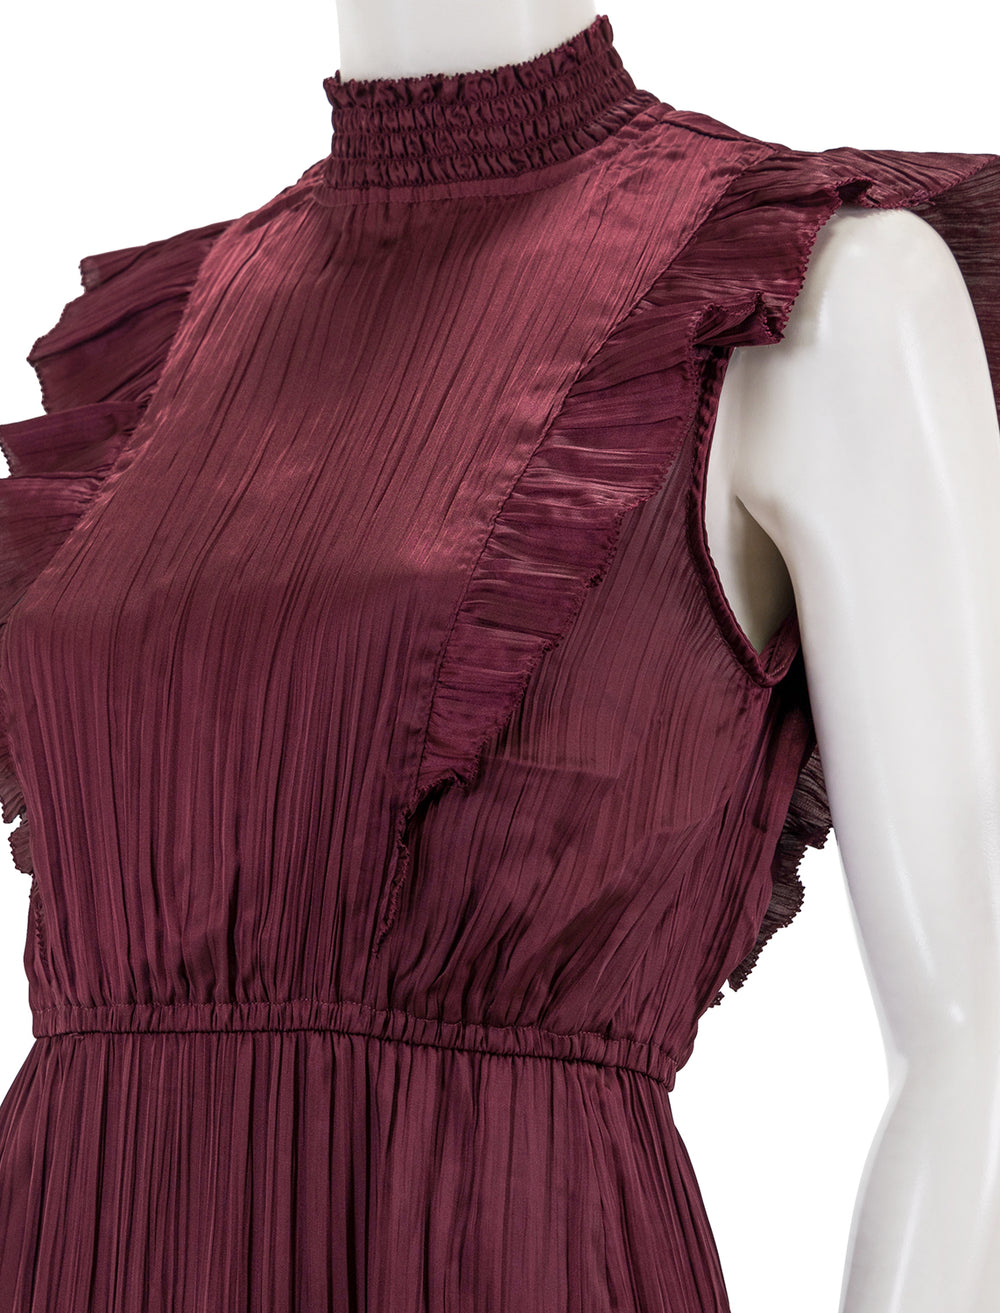 Close-up view of Steve Madden's wednesday dress in wine.